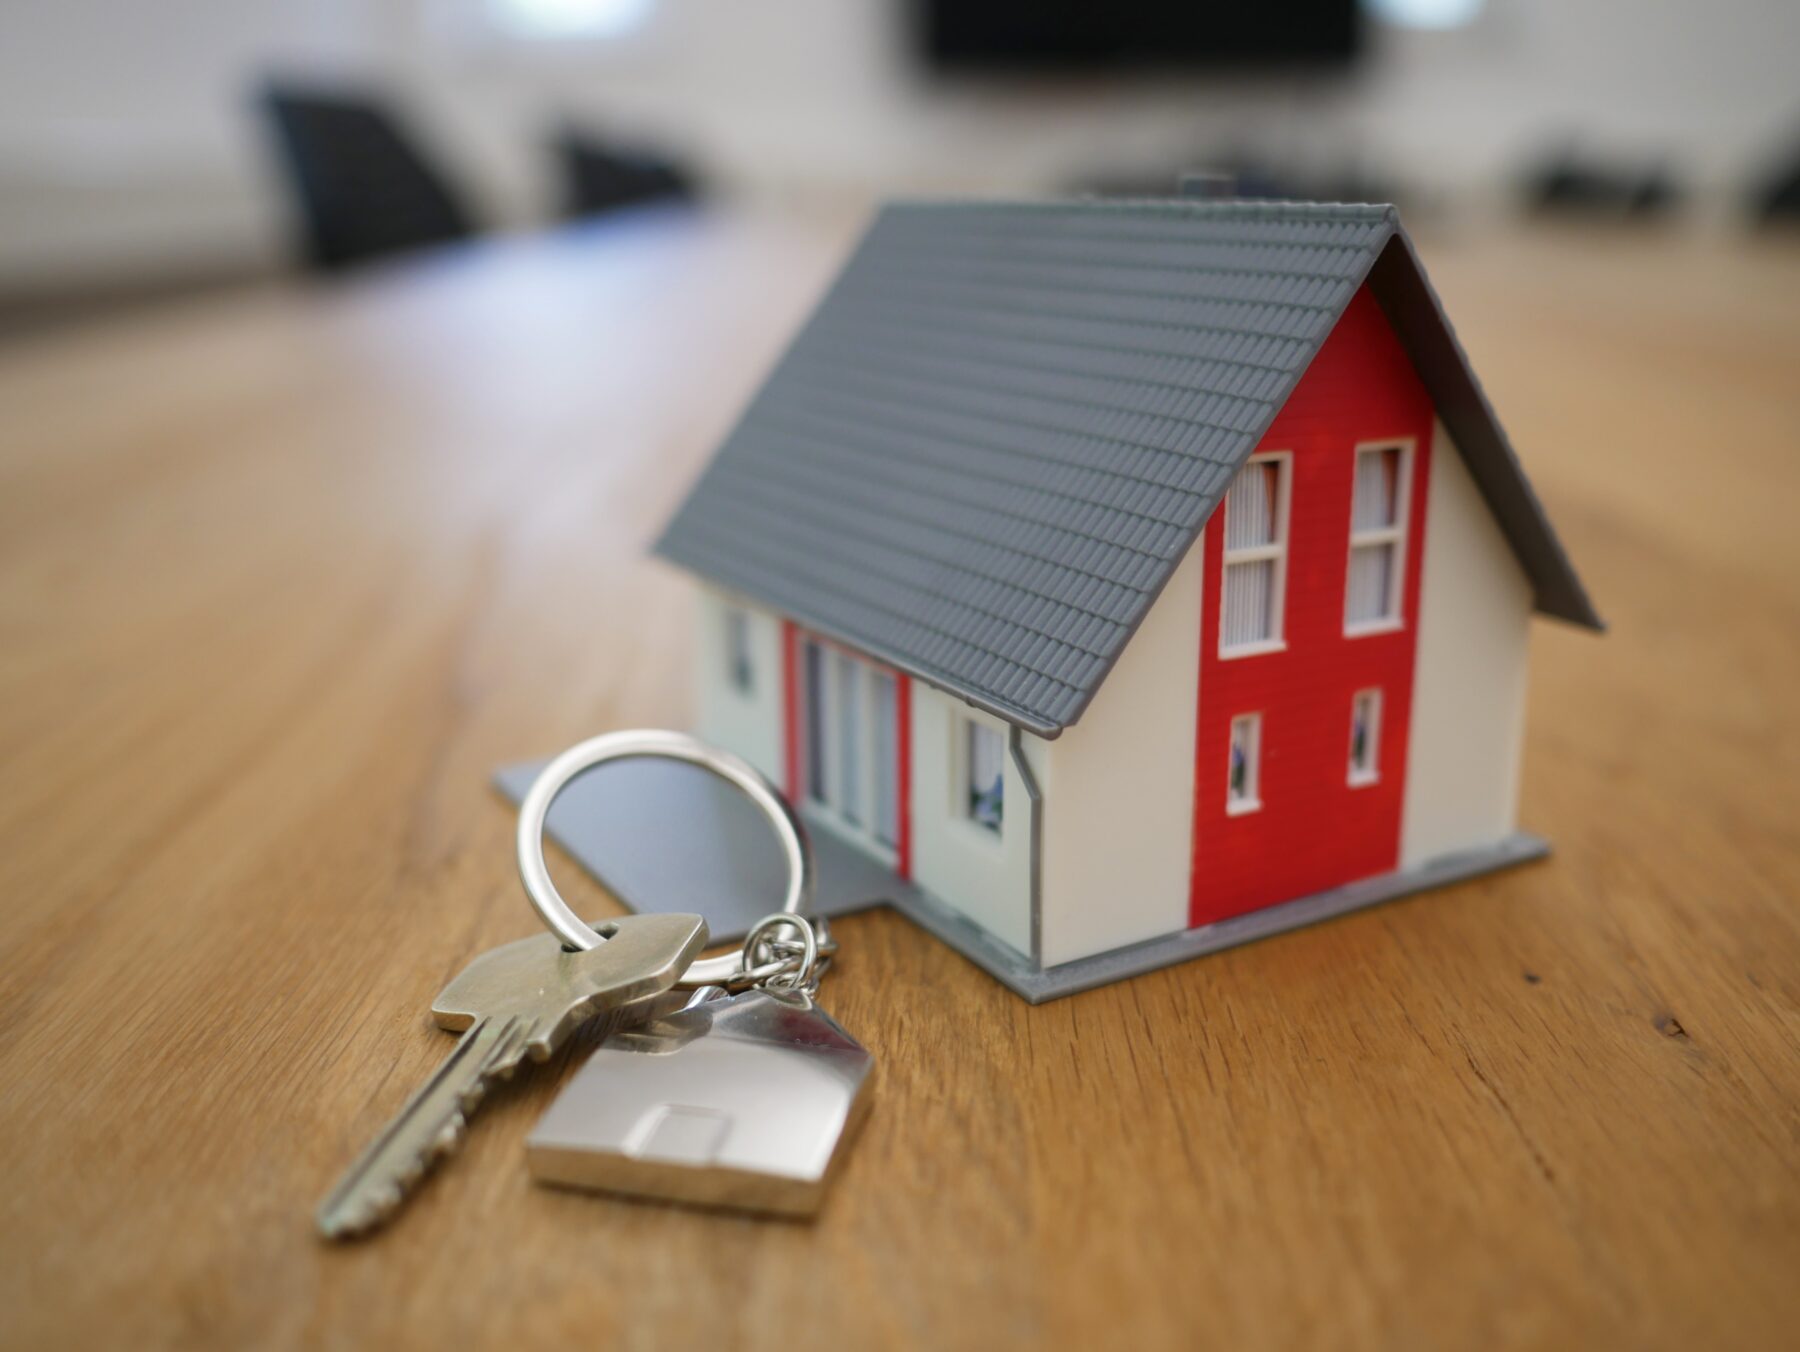 little red house model on table next to a metal key on a key chain